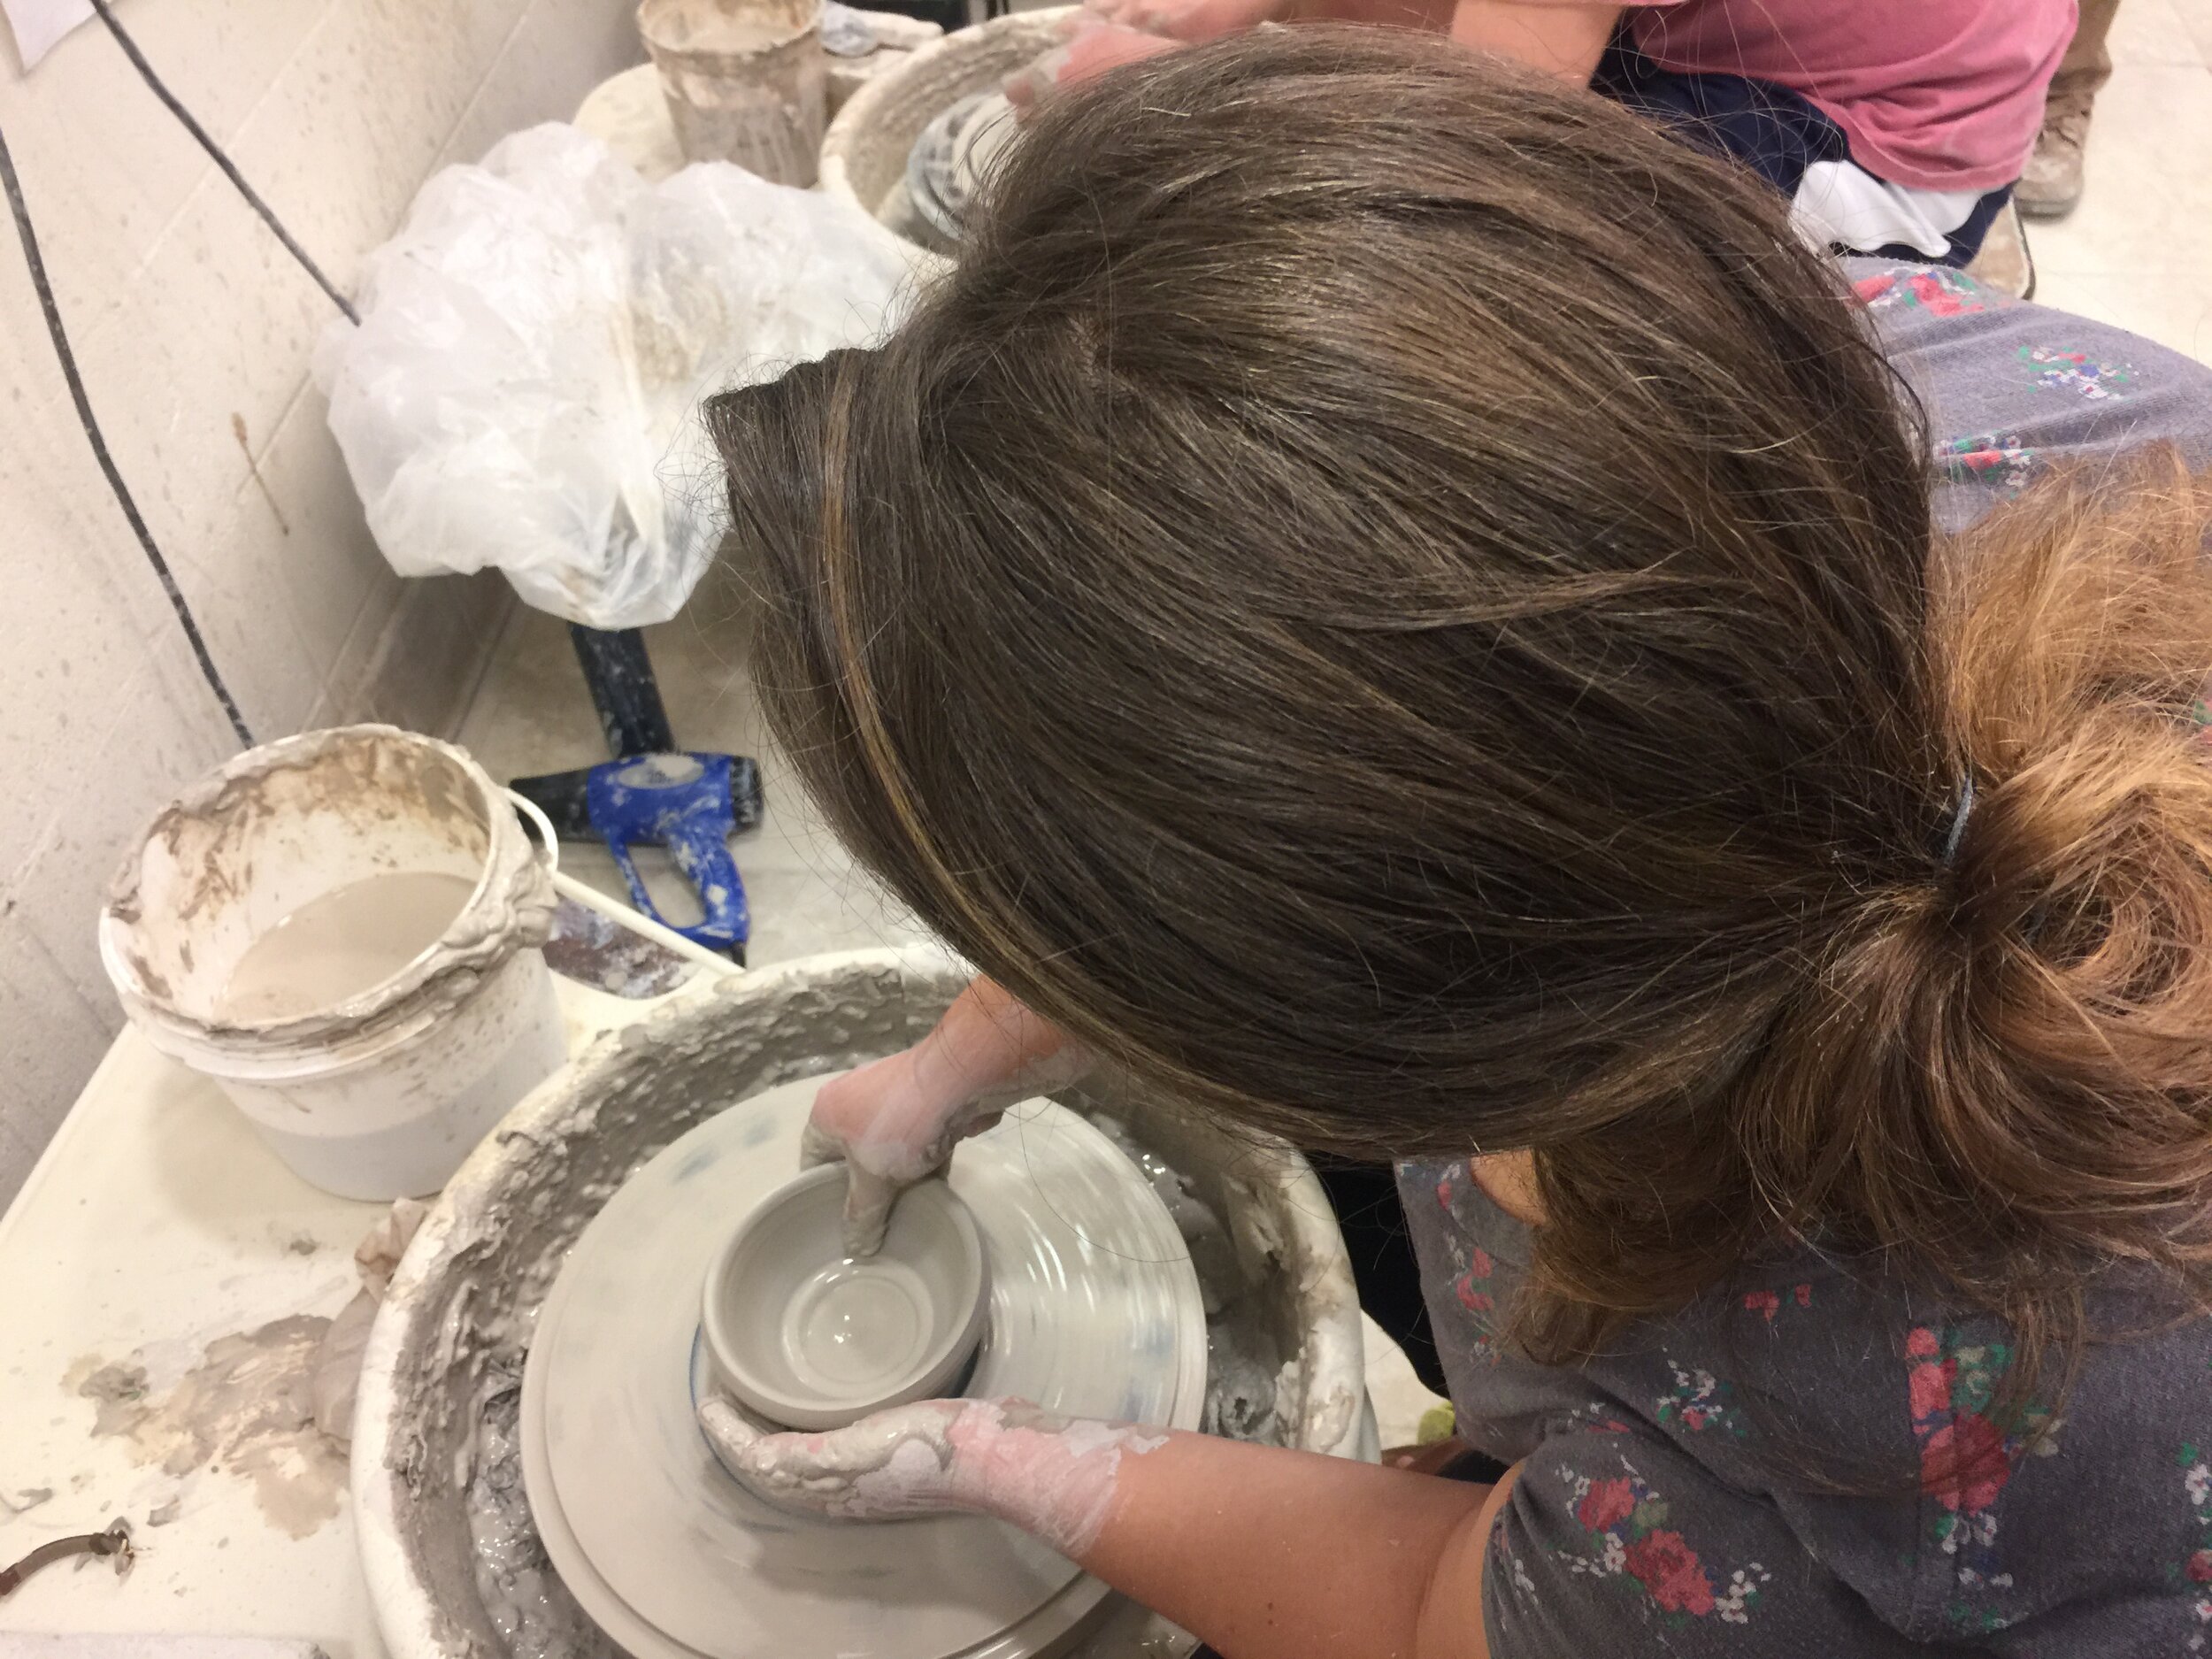 Student Working the Potter's Wheel, Sam Fox School of Arts and Design, Washington University in St. Louis, Spring 2017